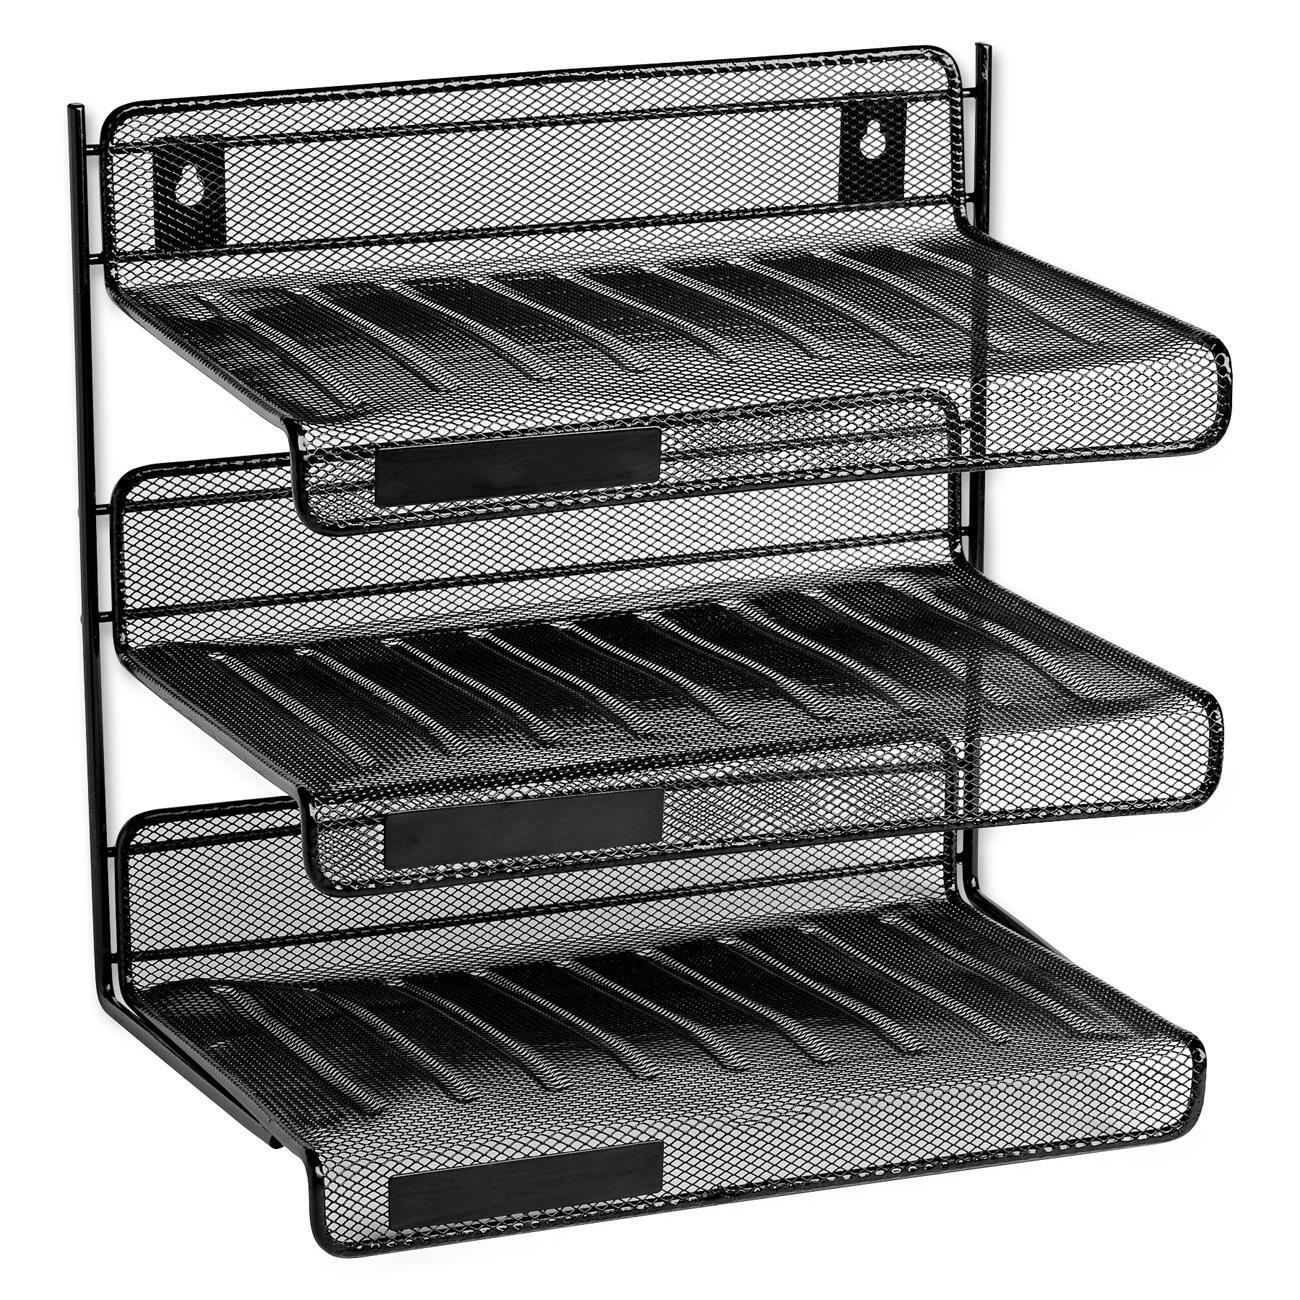 Rolodex Expressions Mesh 3 Tier Desk Shelf Madill The Office